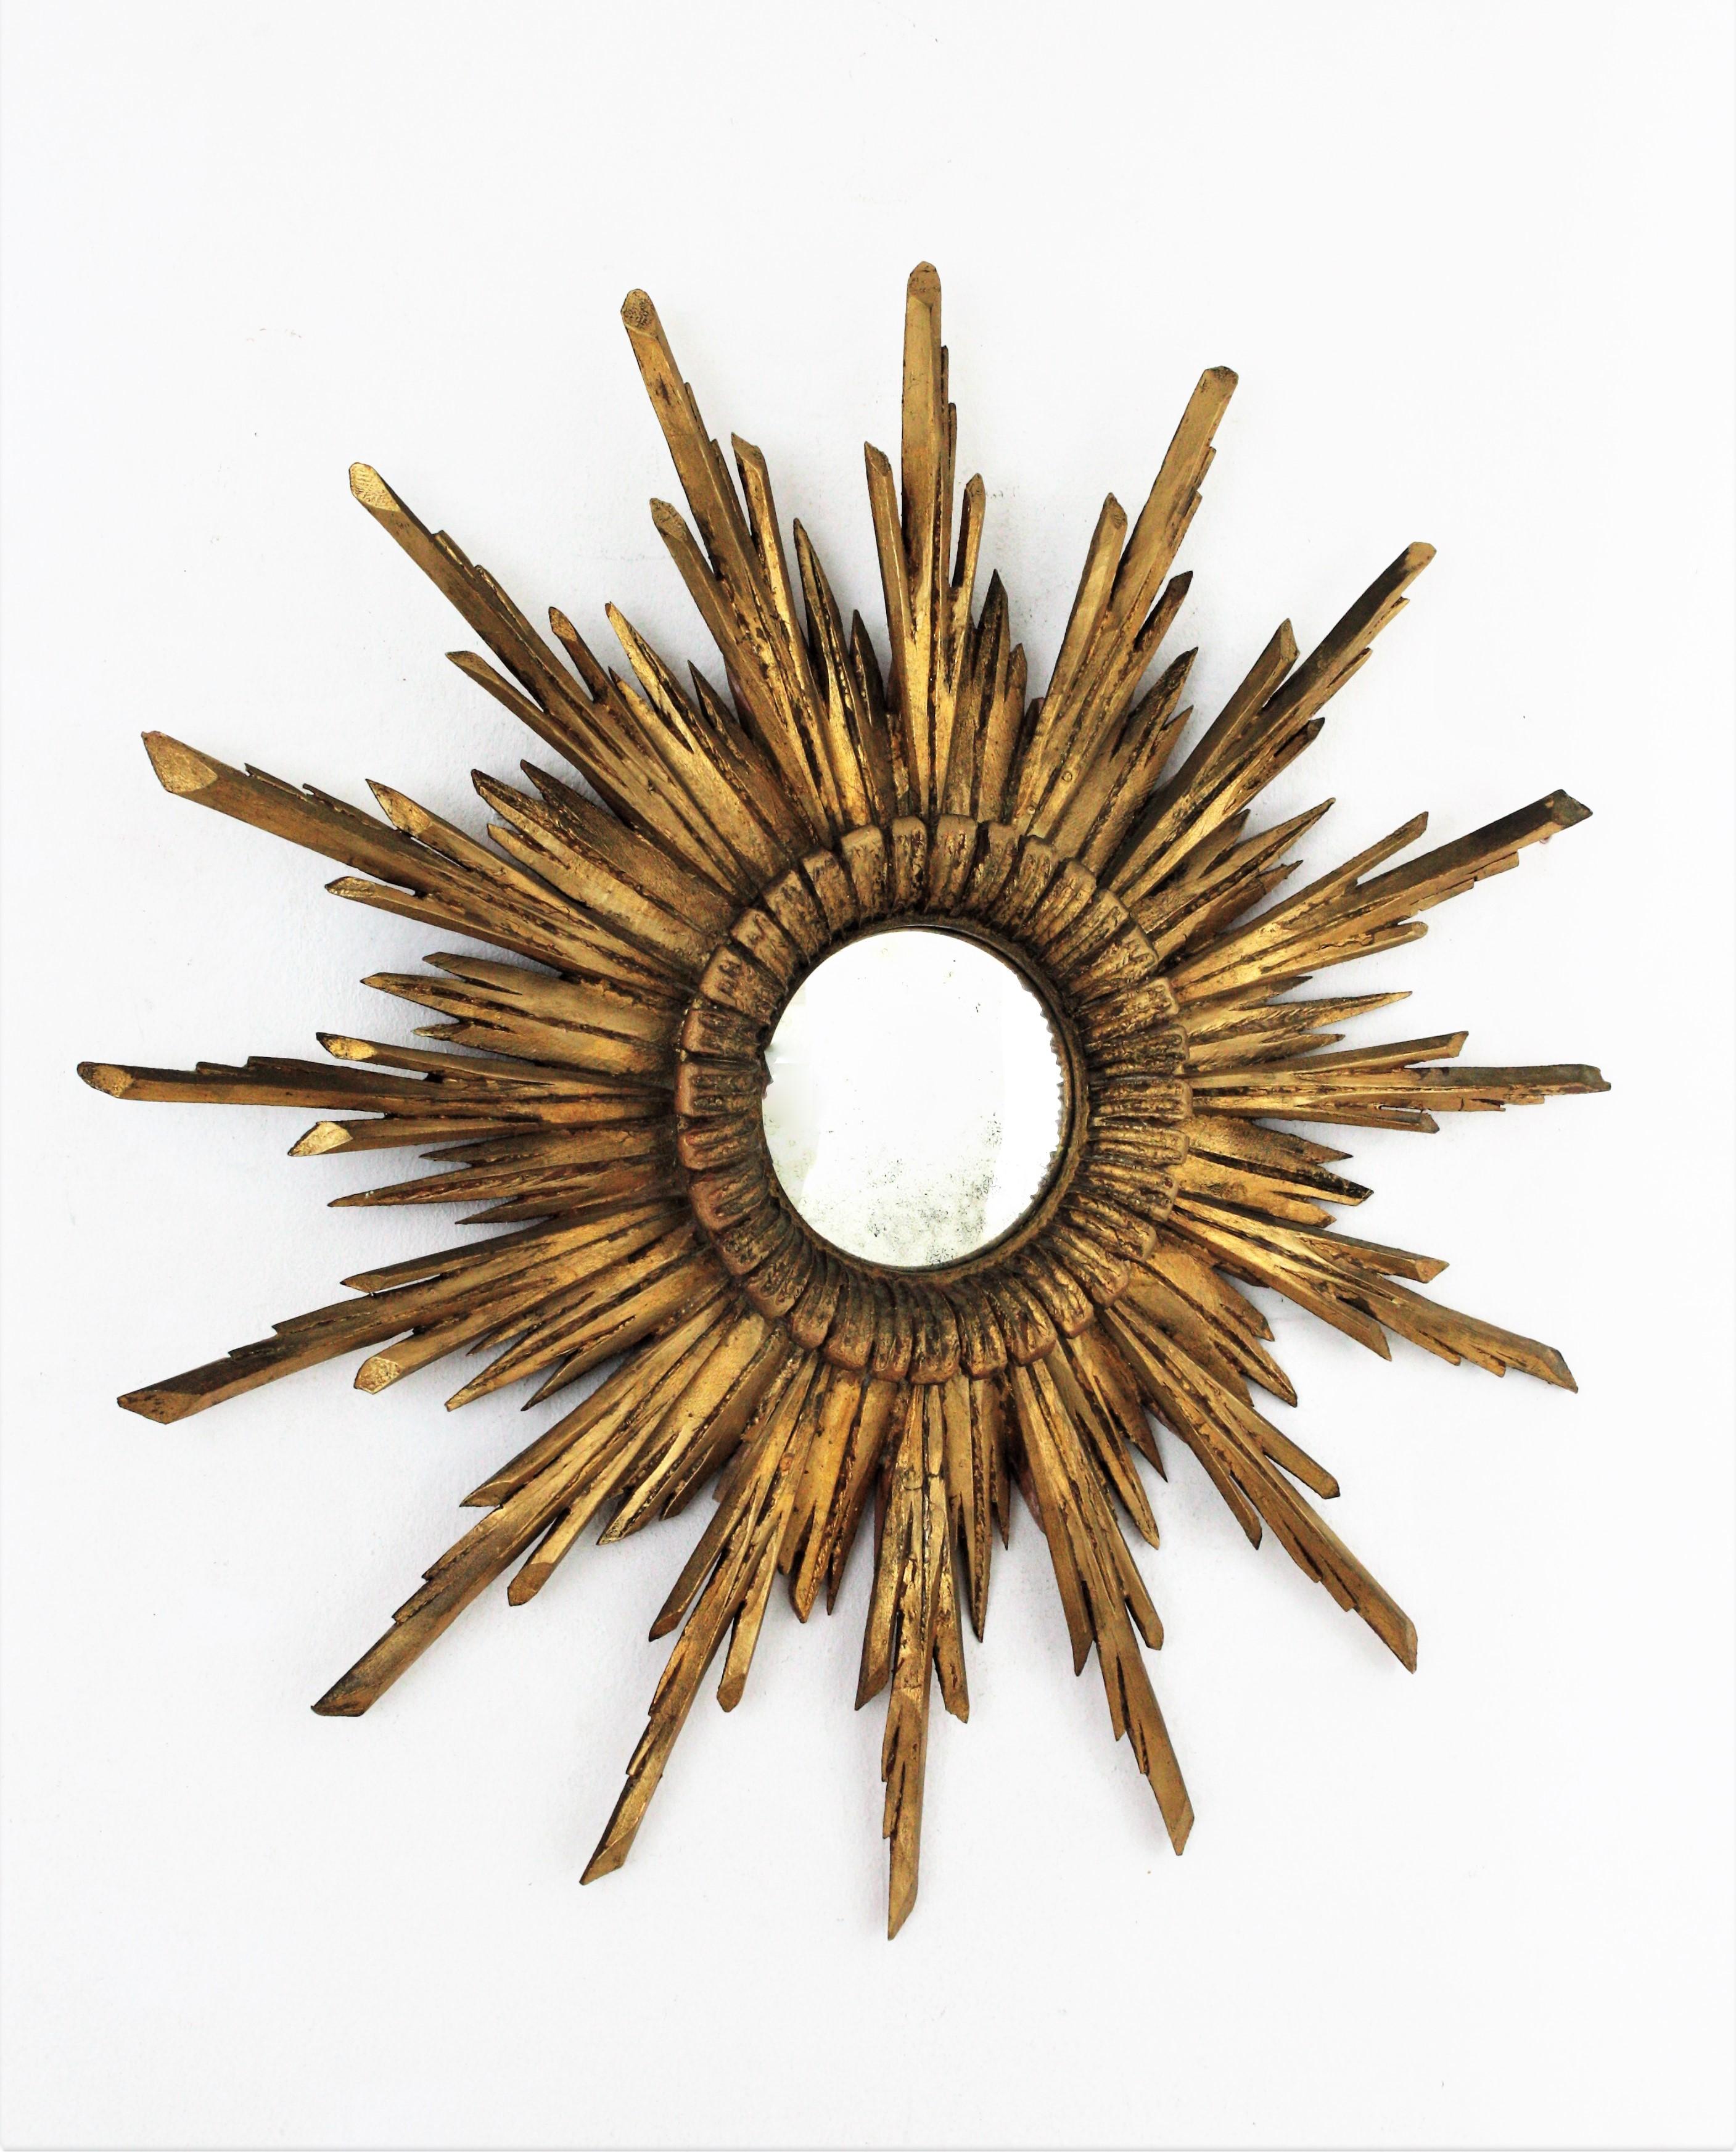 Impressive hand carved giltwood Baroque style sunburst / starburst mirror. Spain, circa 1930s.
The frame of this wall mirror is richly carved, it has two layers of beams in different sizes and a beautiful gold leaf gilt covering the wood.
Excellent